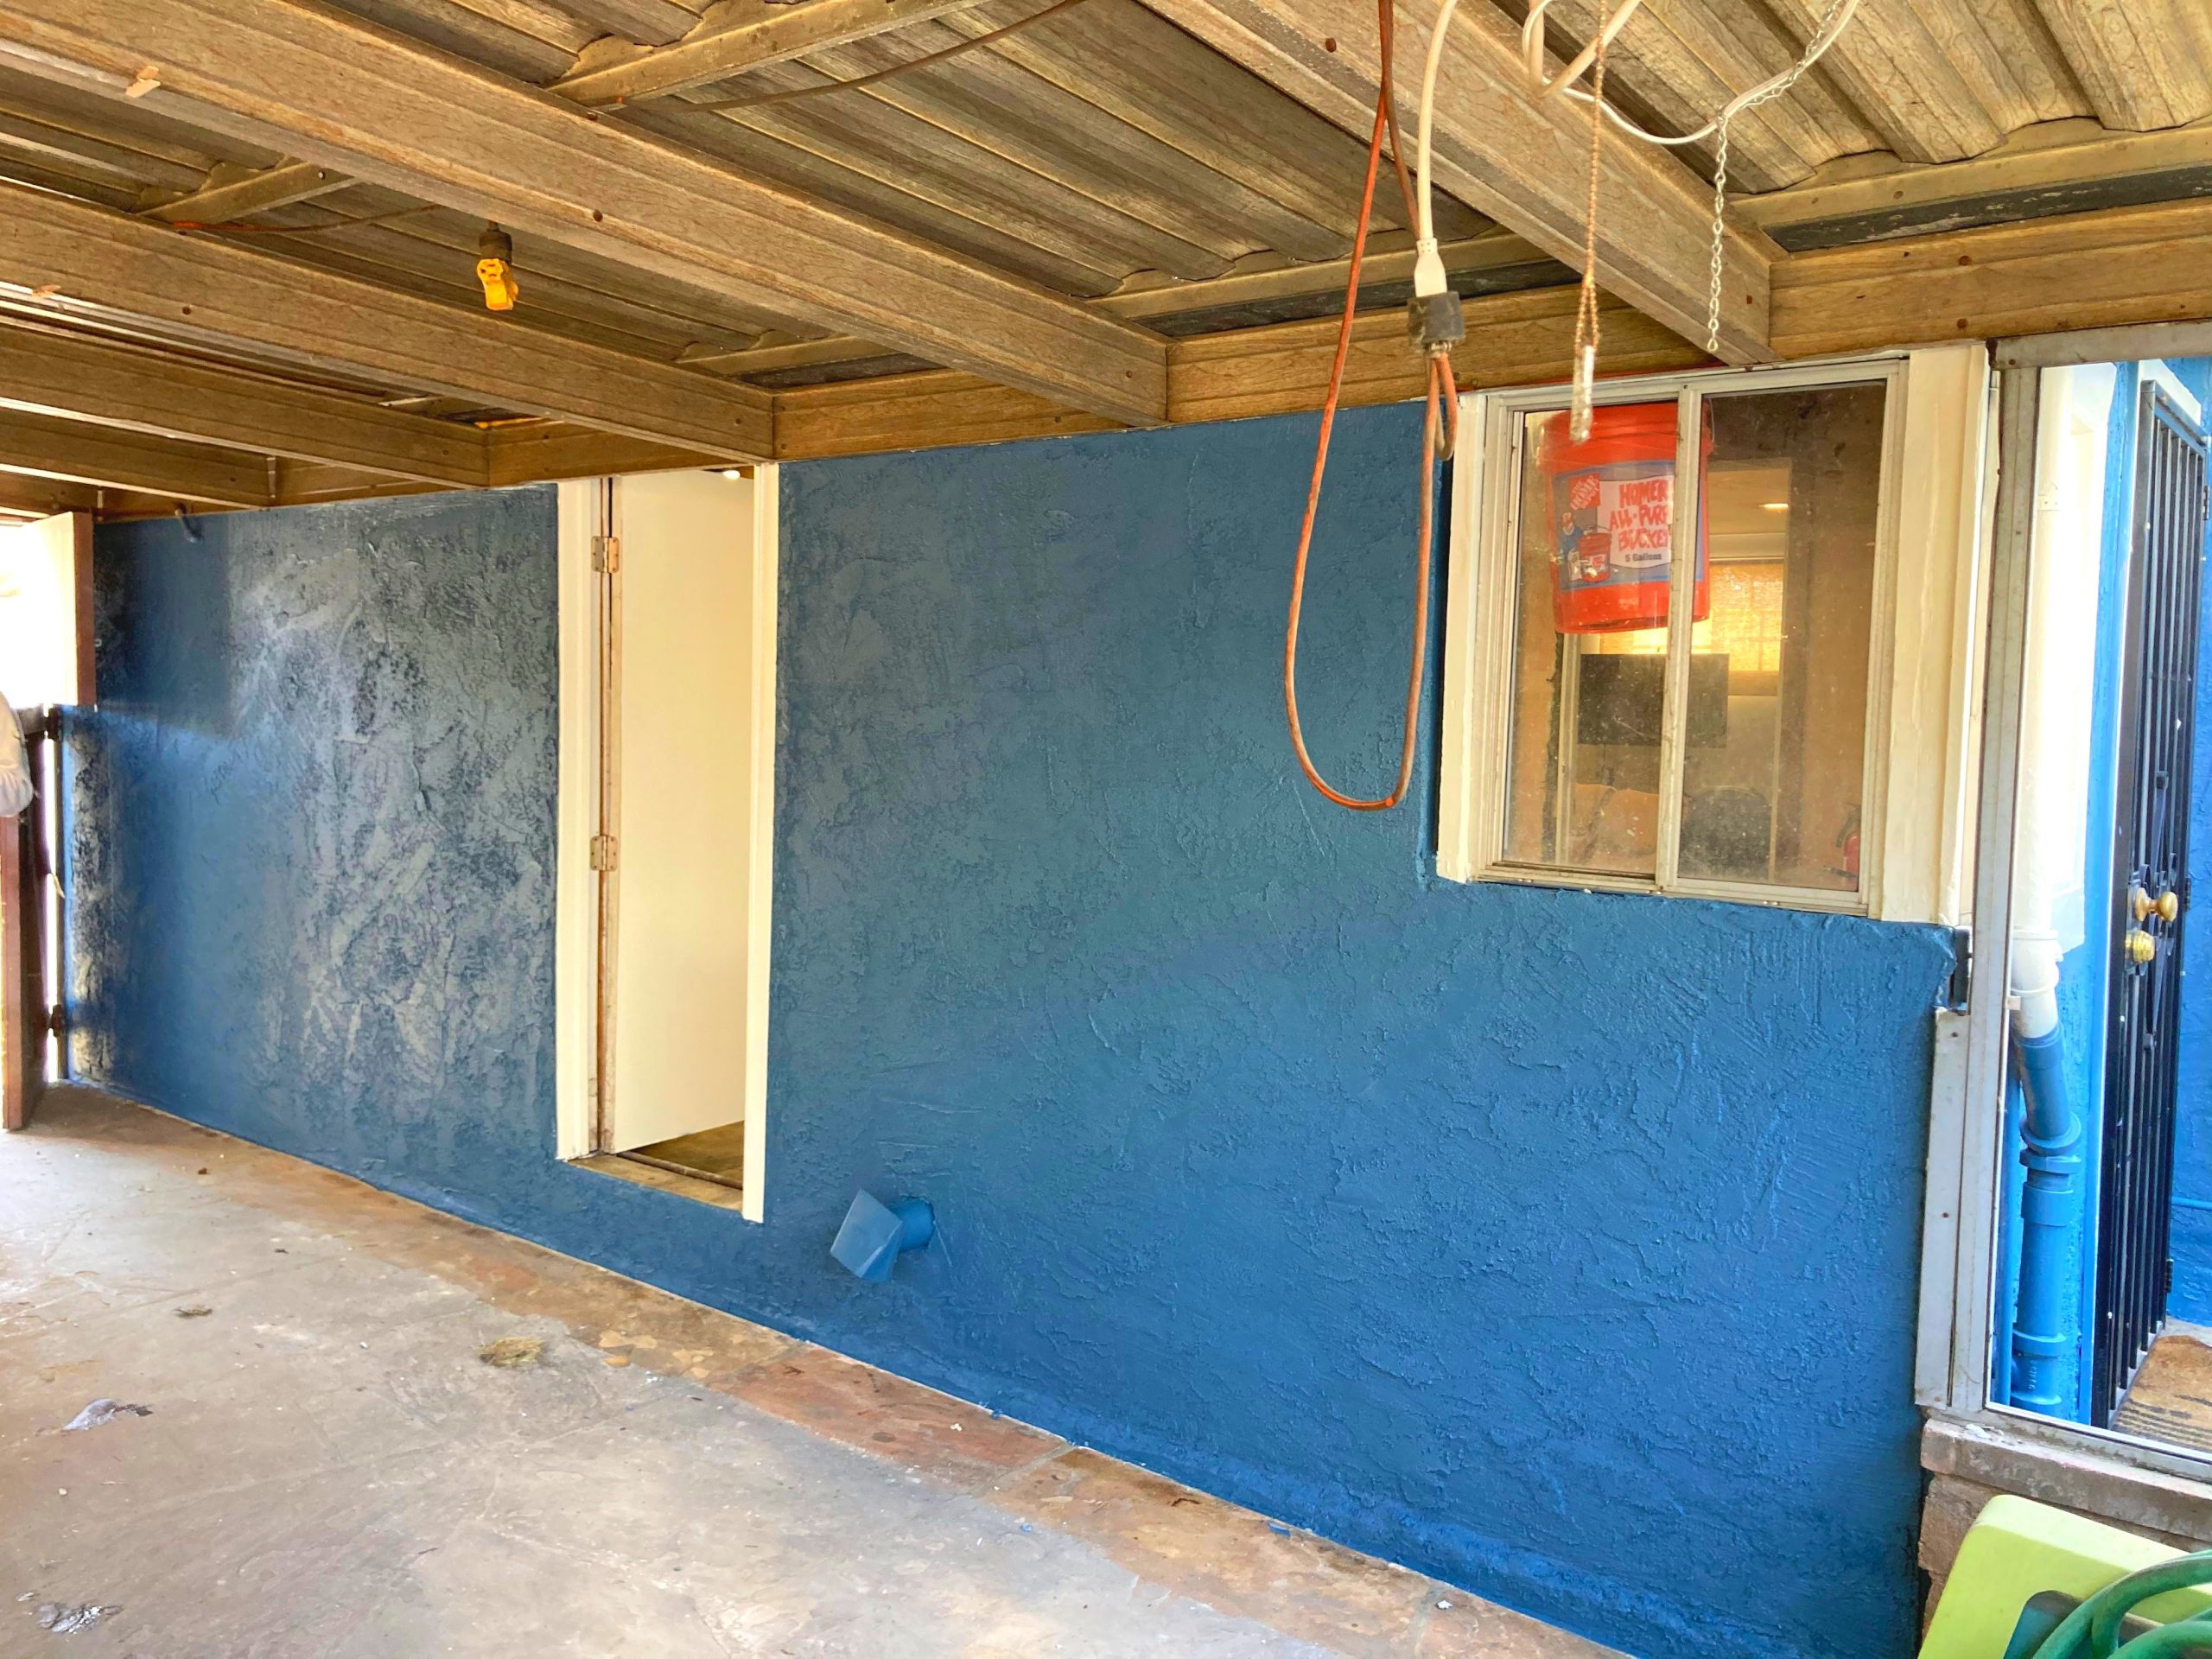 CoolWall Exterior Coating in Monterey Park, CA